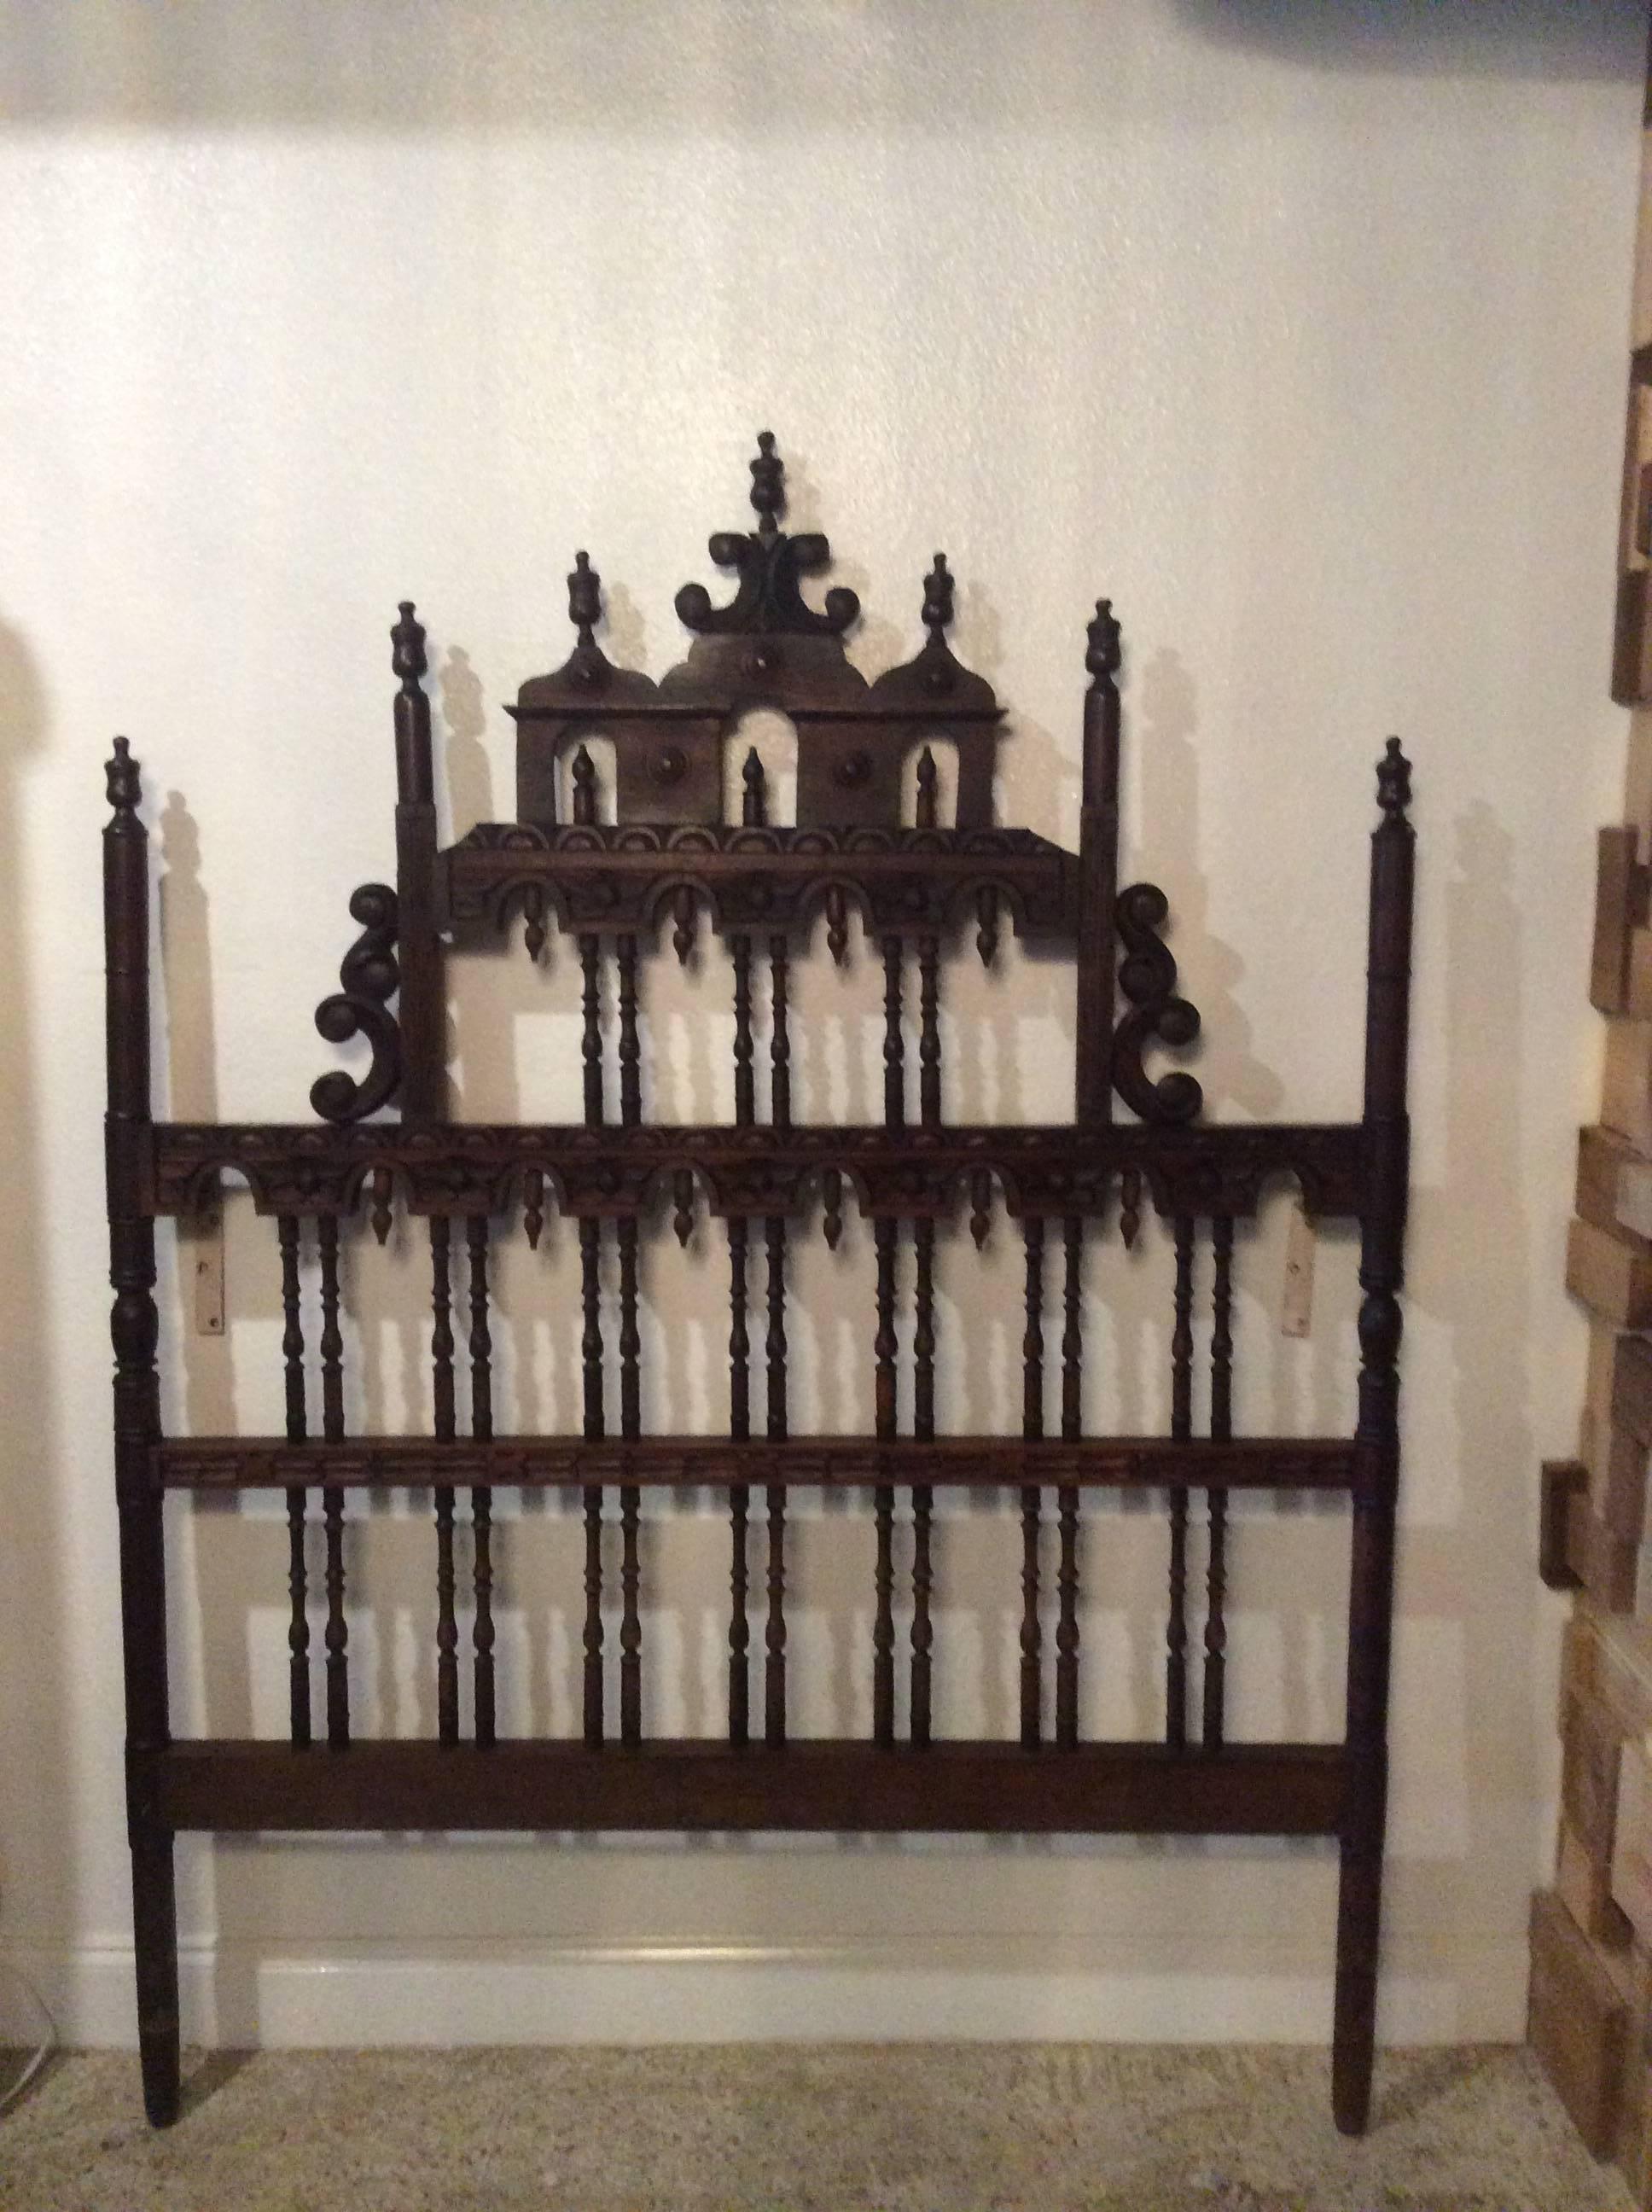 The most amazing headboard ever! Hand-carved details that inlcude finials, spindles, and an intricate pagoda top. This can be left as is or I can have it professionally lacquered for you at an additional charge. Imagine this in a girls room!  Lovely